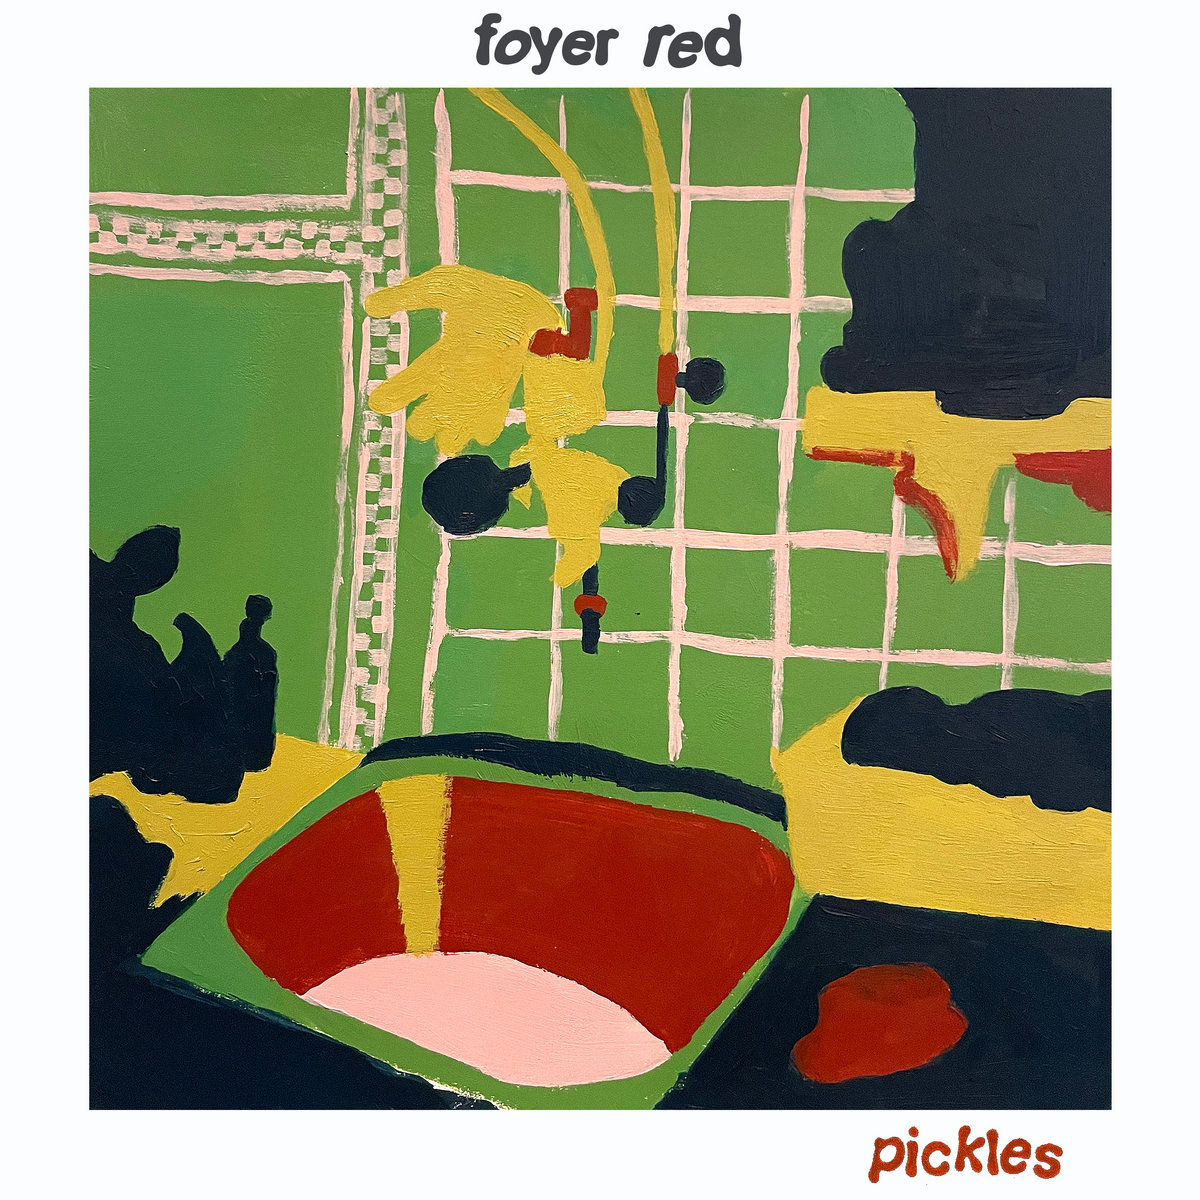 artwork for Pickles by Foyer Red